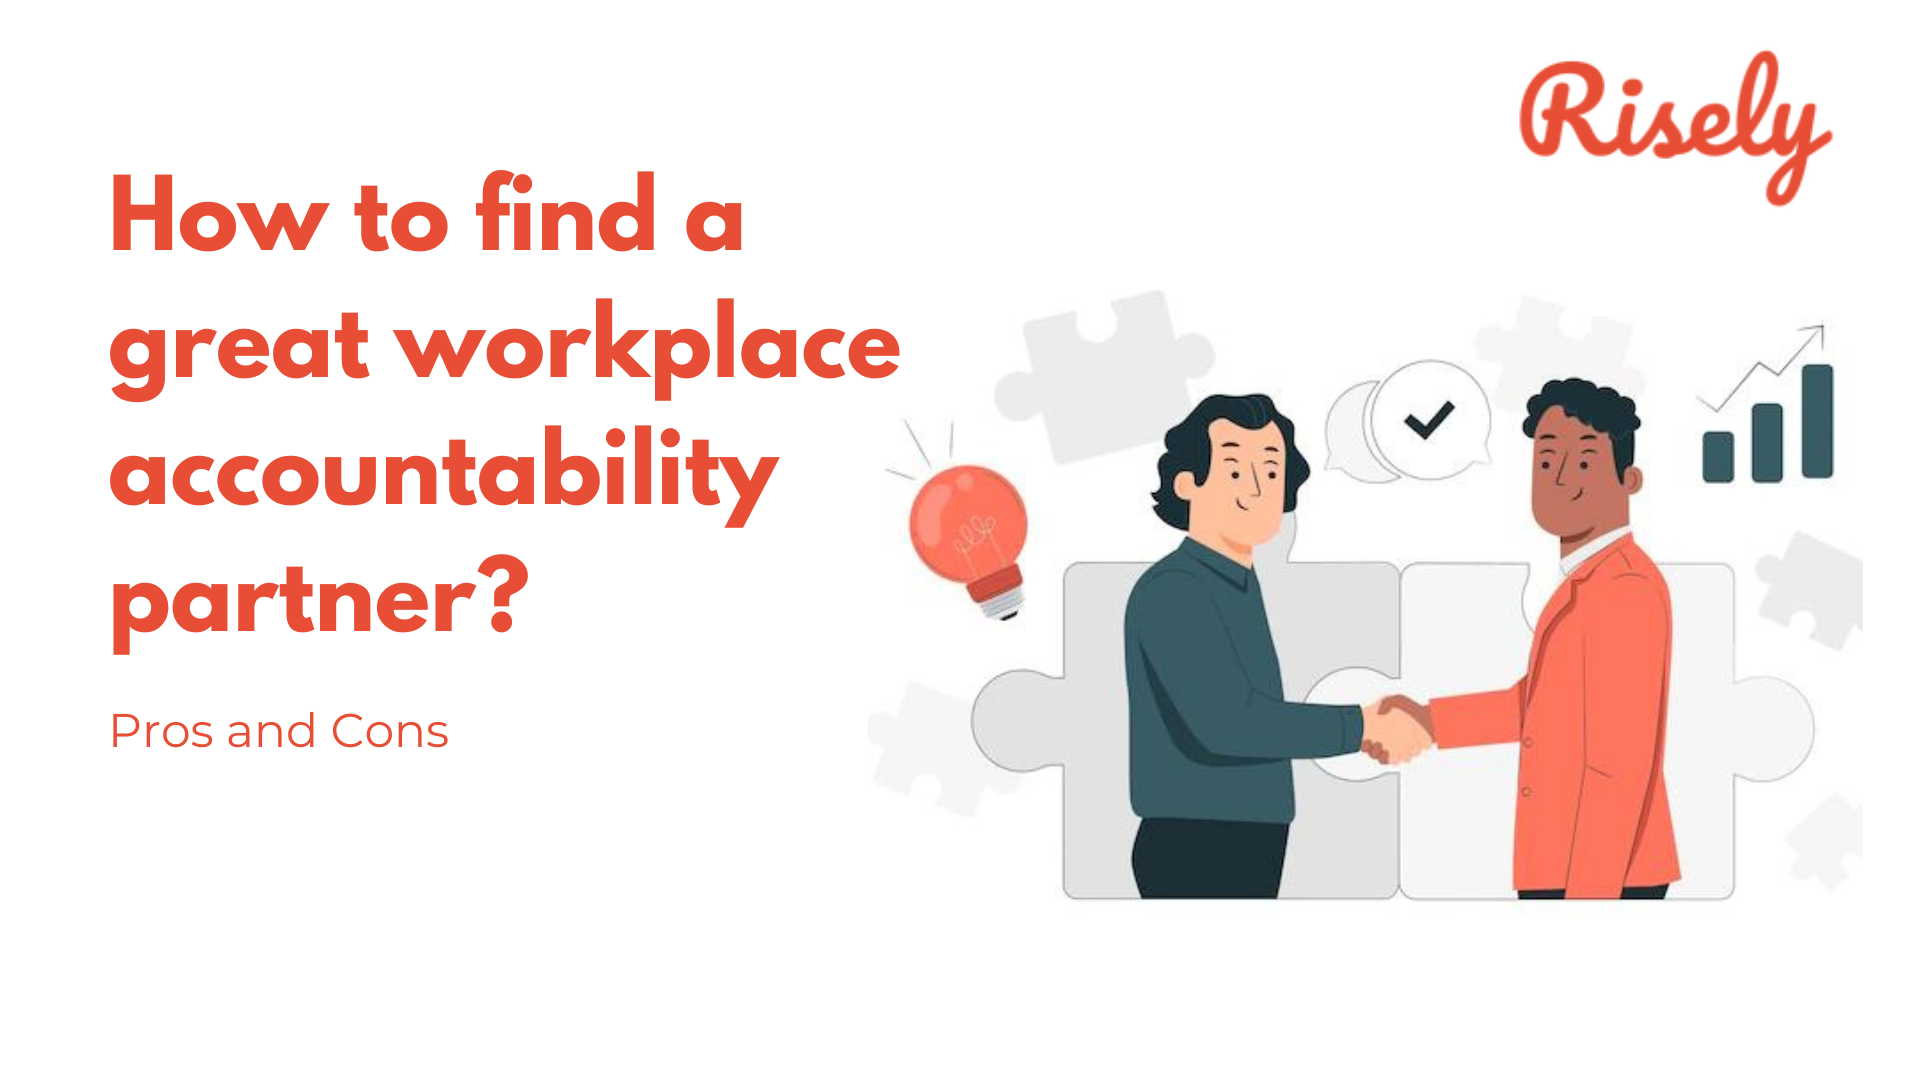 How to find a great workplace accountability partner?